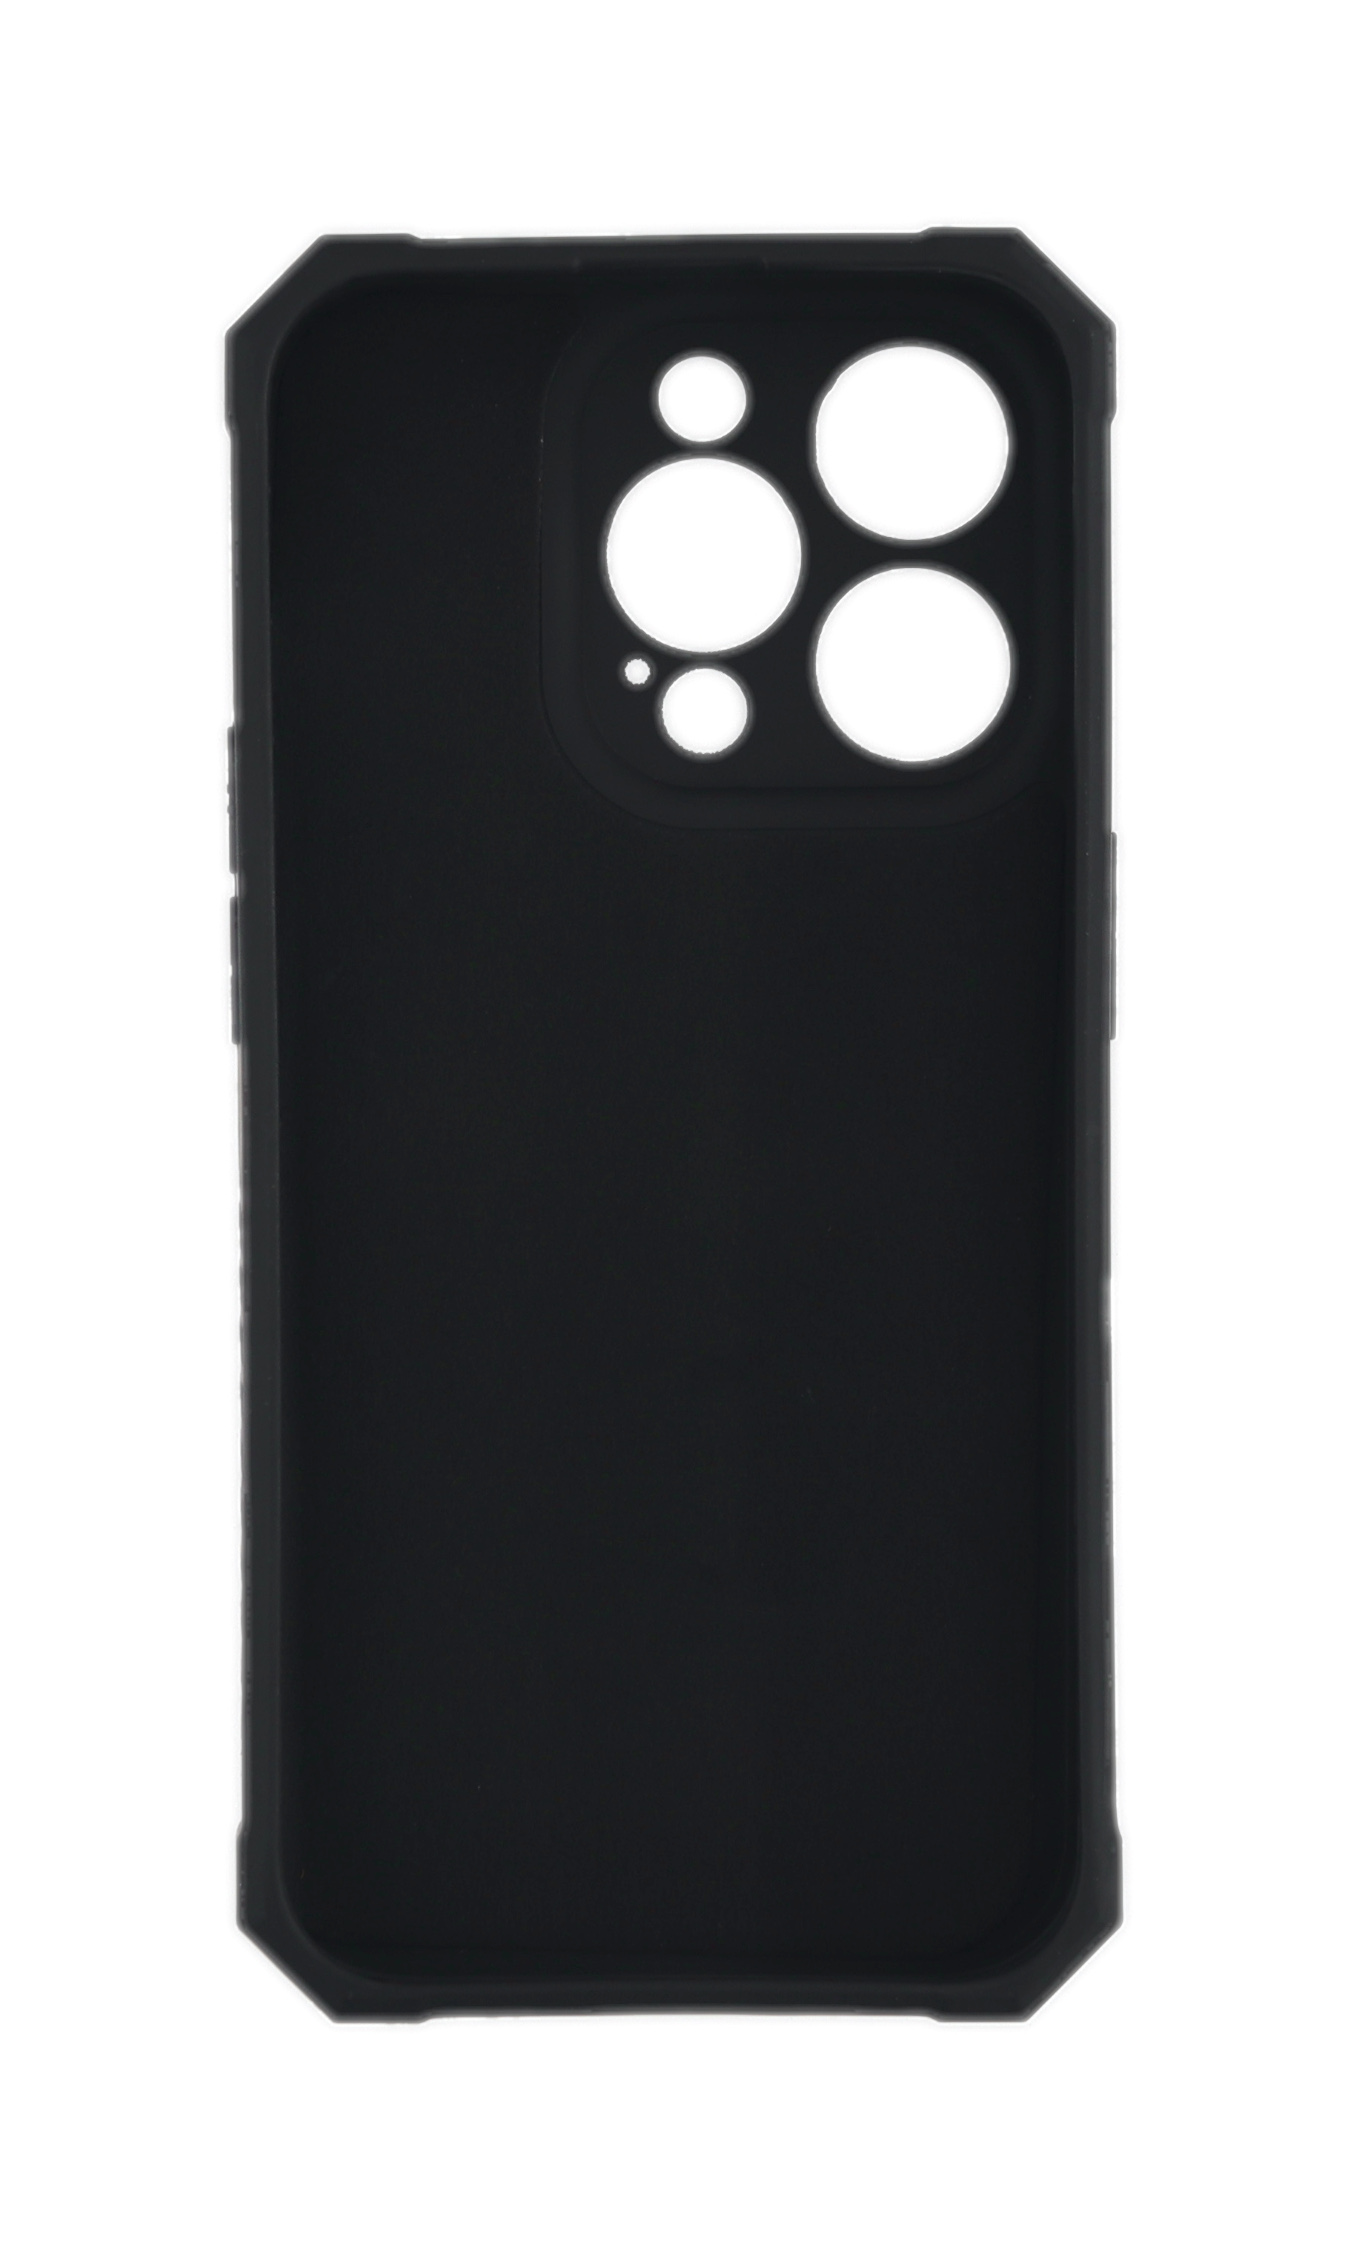 Backcover, Pro, Schwarz 15 Anti Apple, Solid, Case JAMCOVER Shock iPhone